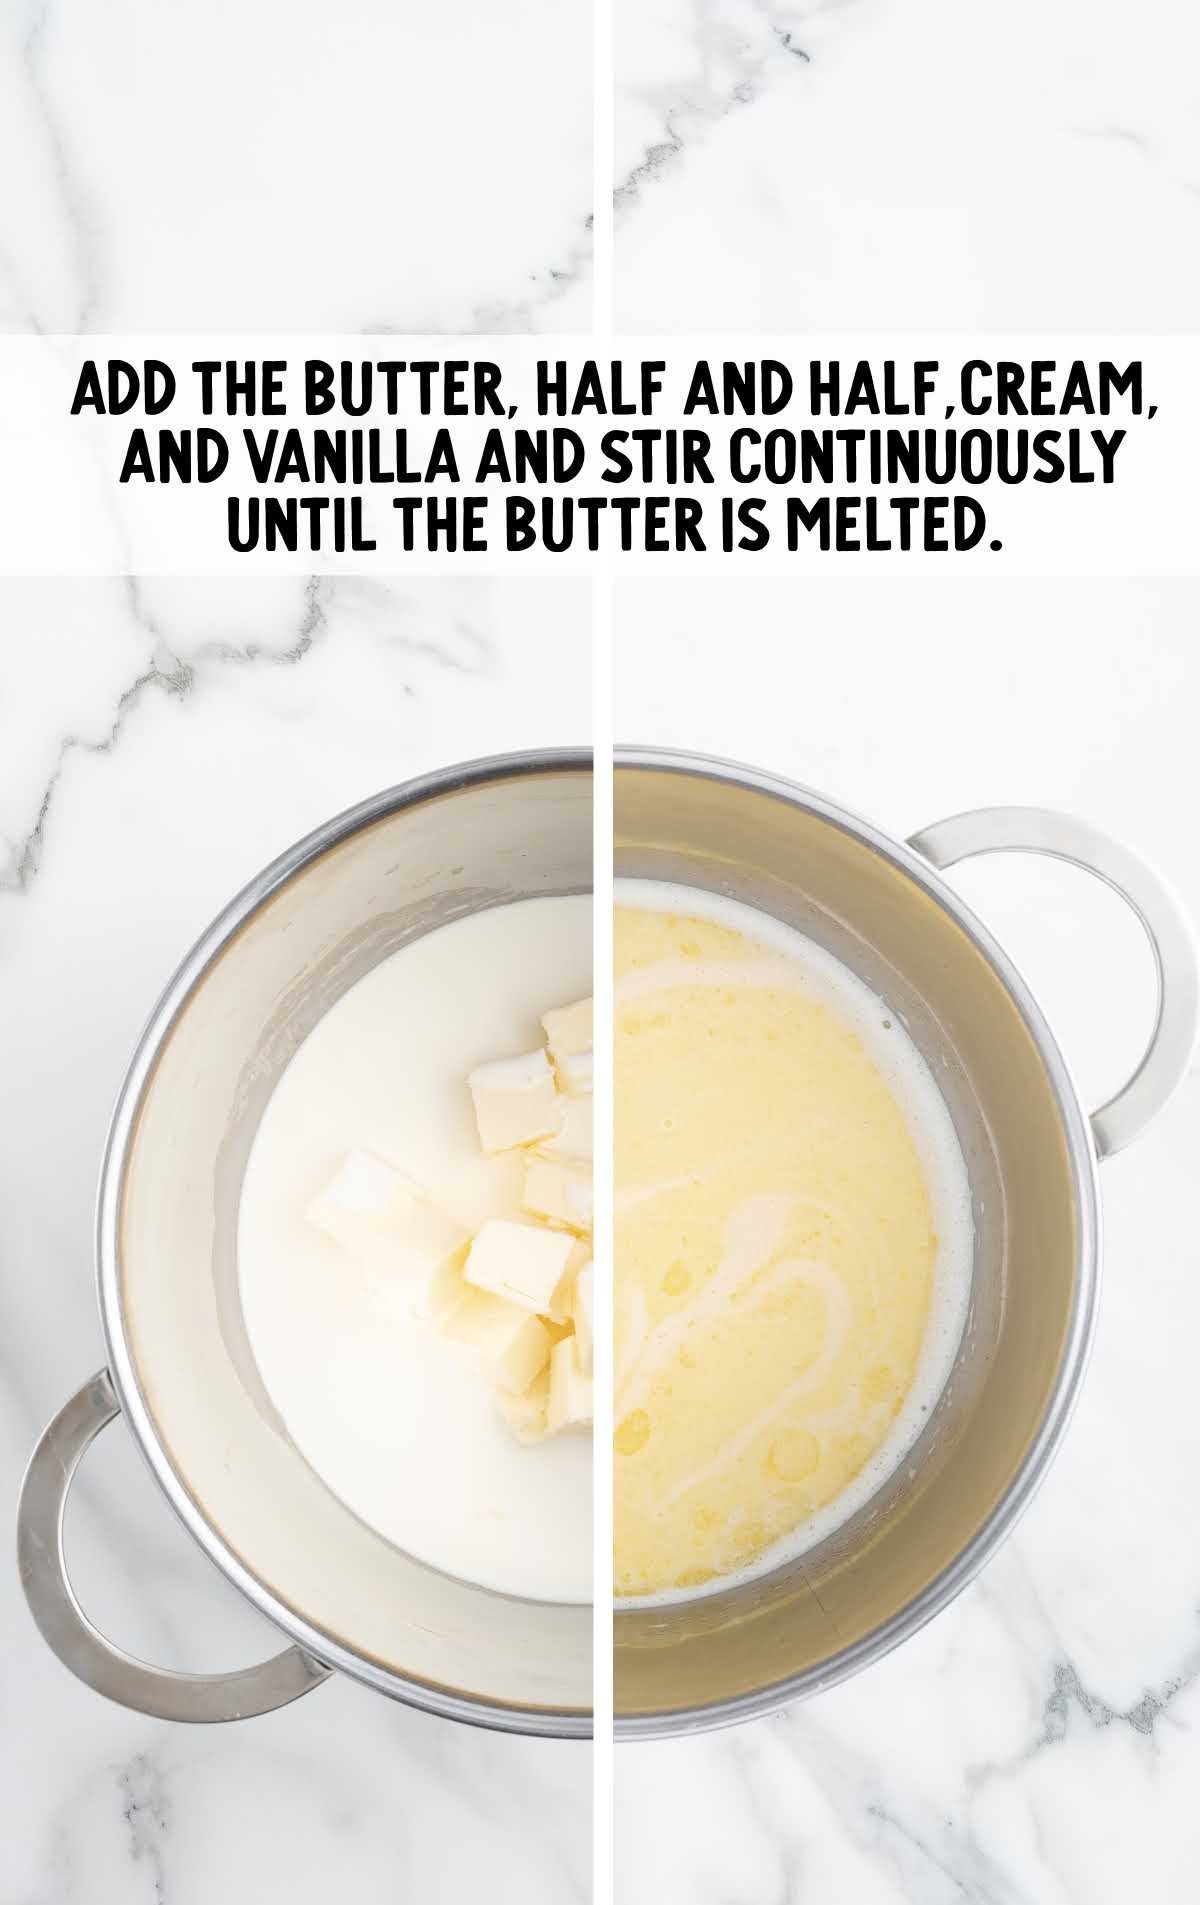 butter, half and half, cream, vanilla added to the banana flavoring mixture